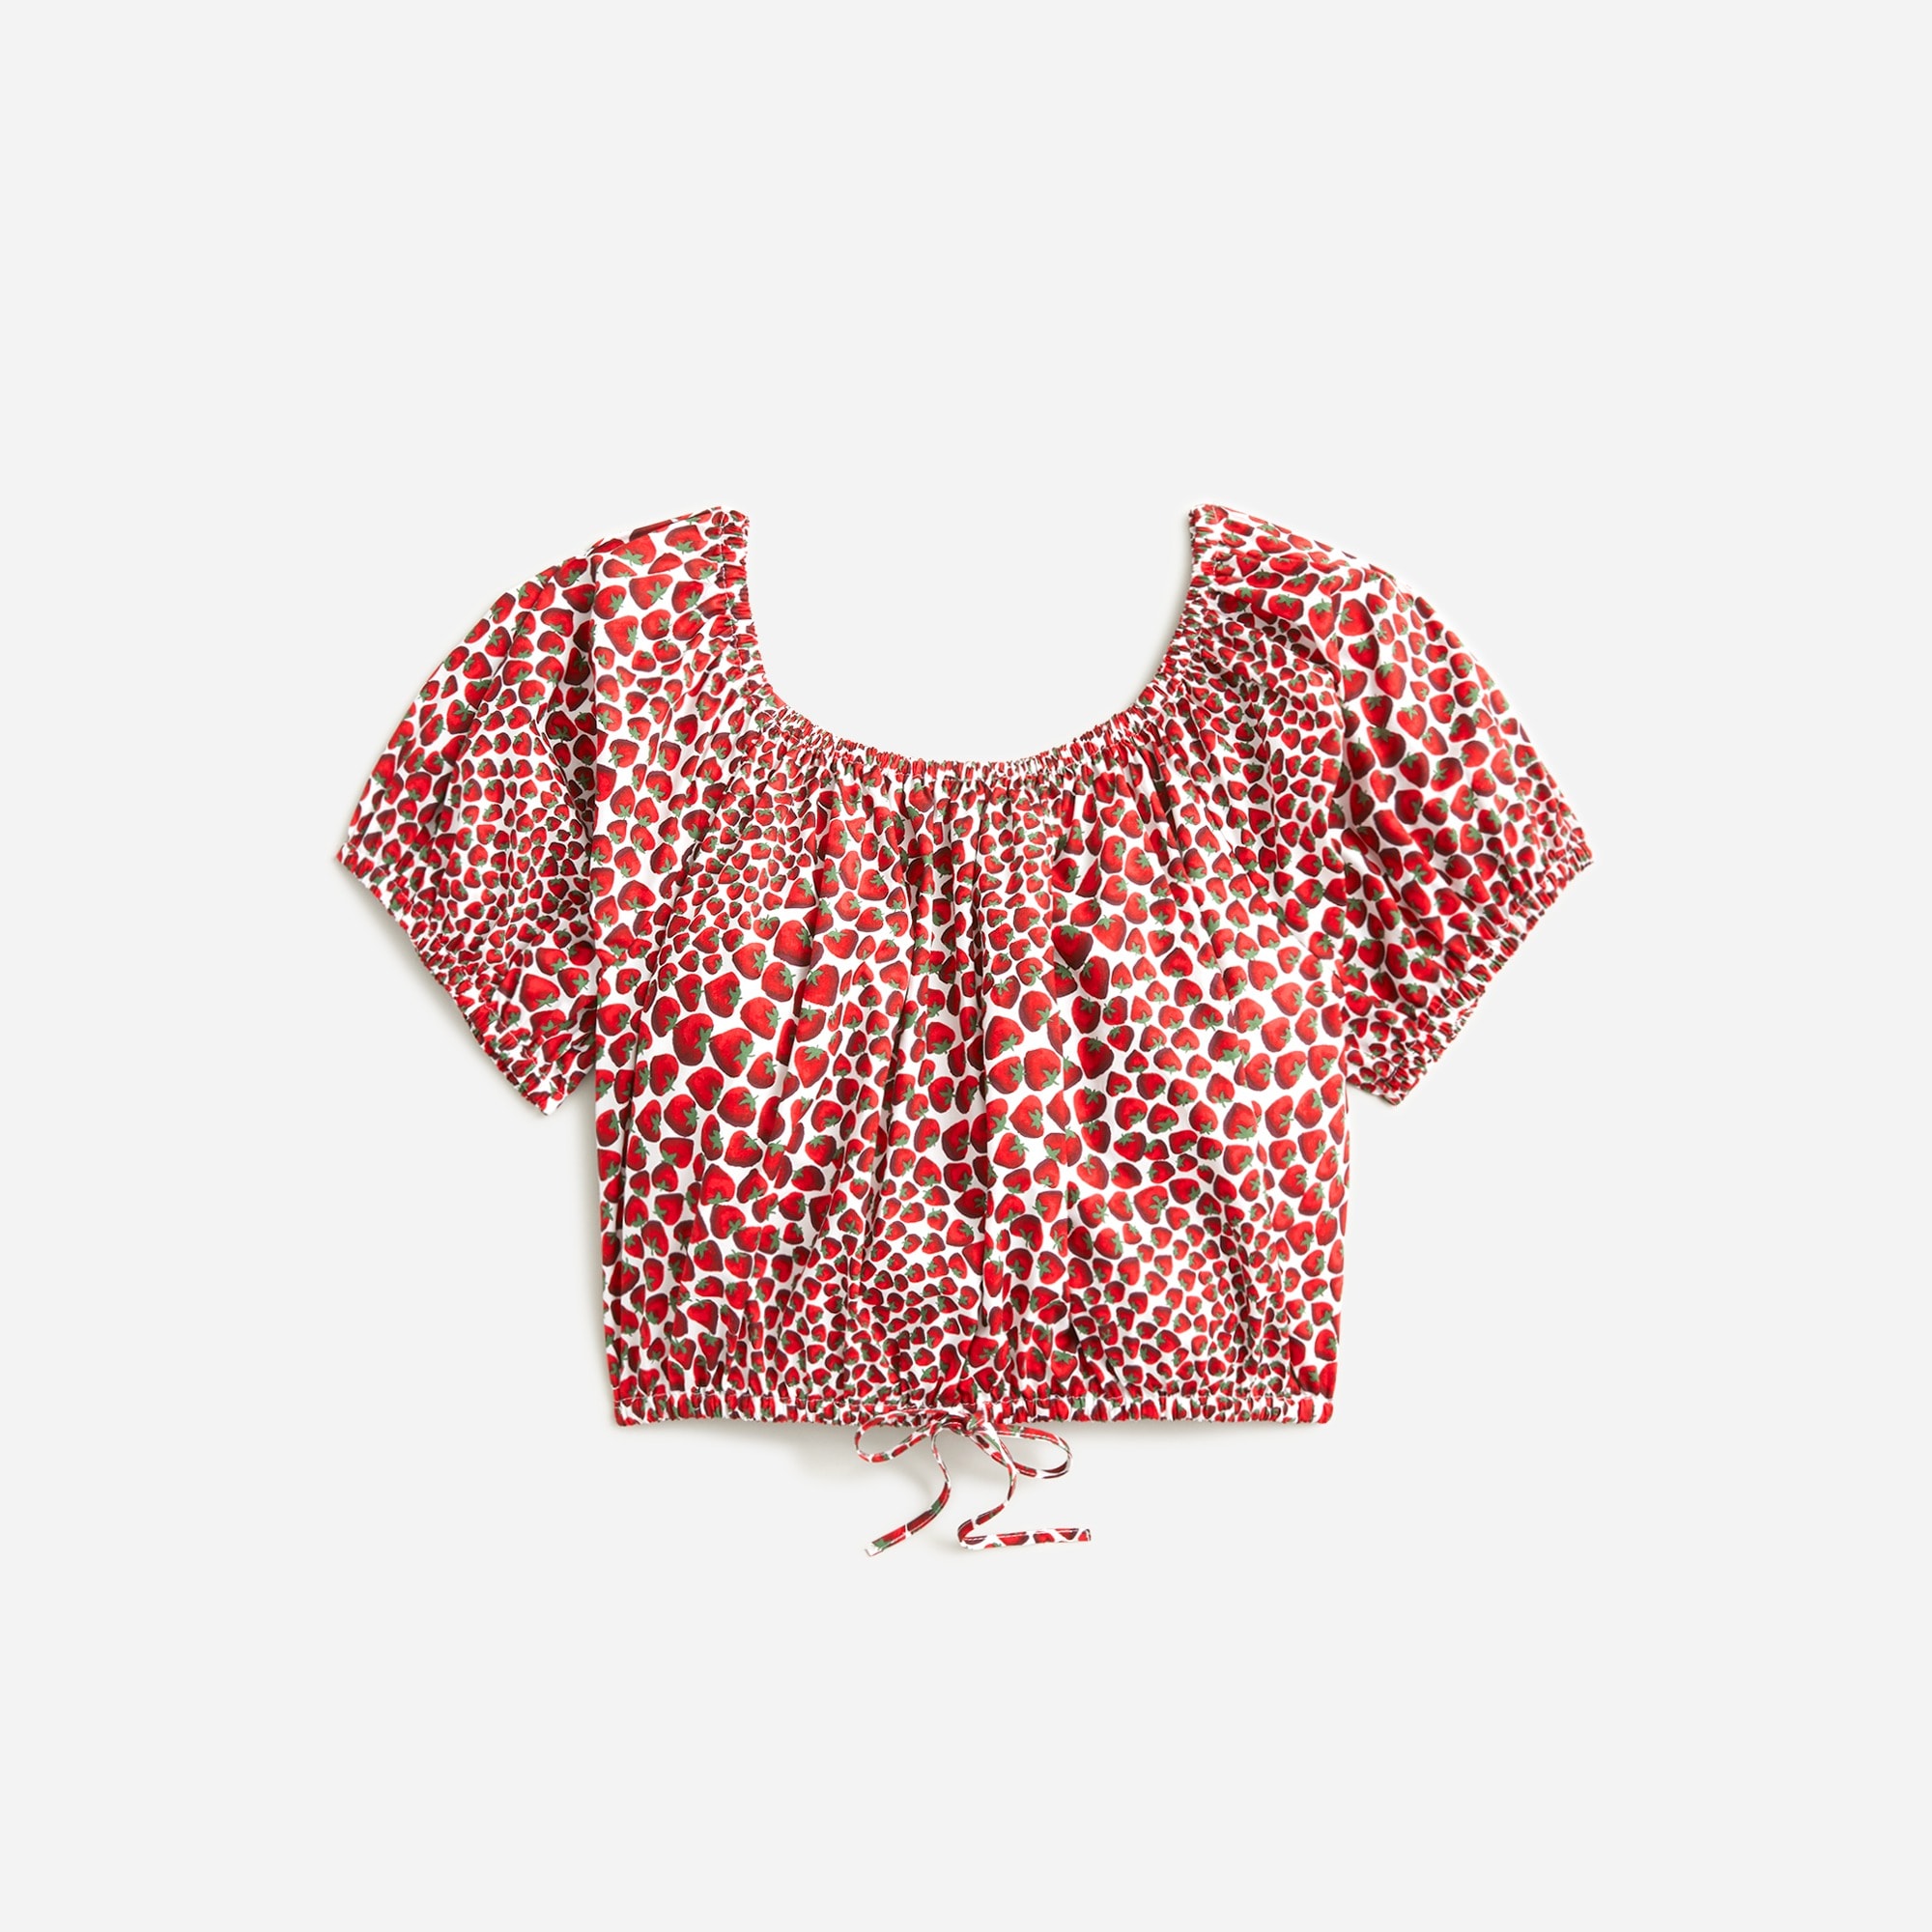  Cinched-waist cropped top in strawberry swirl cotton poplin